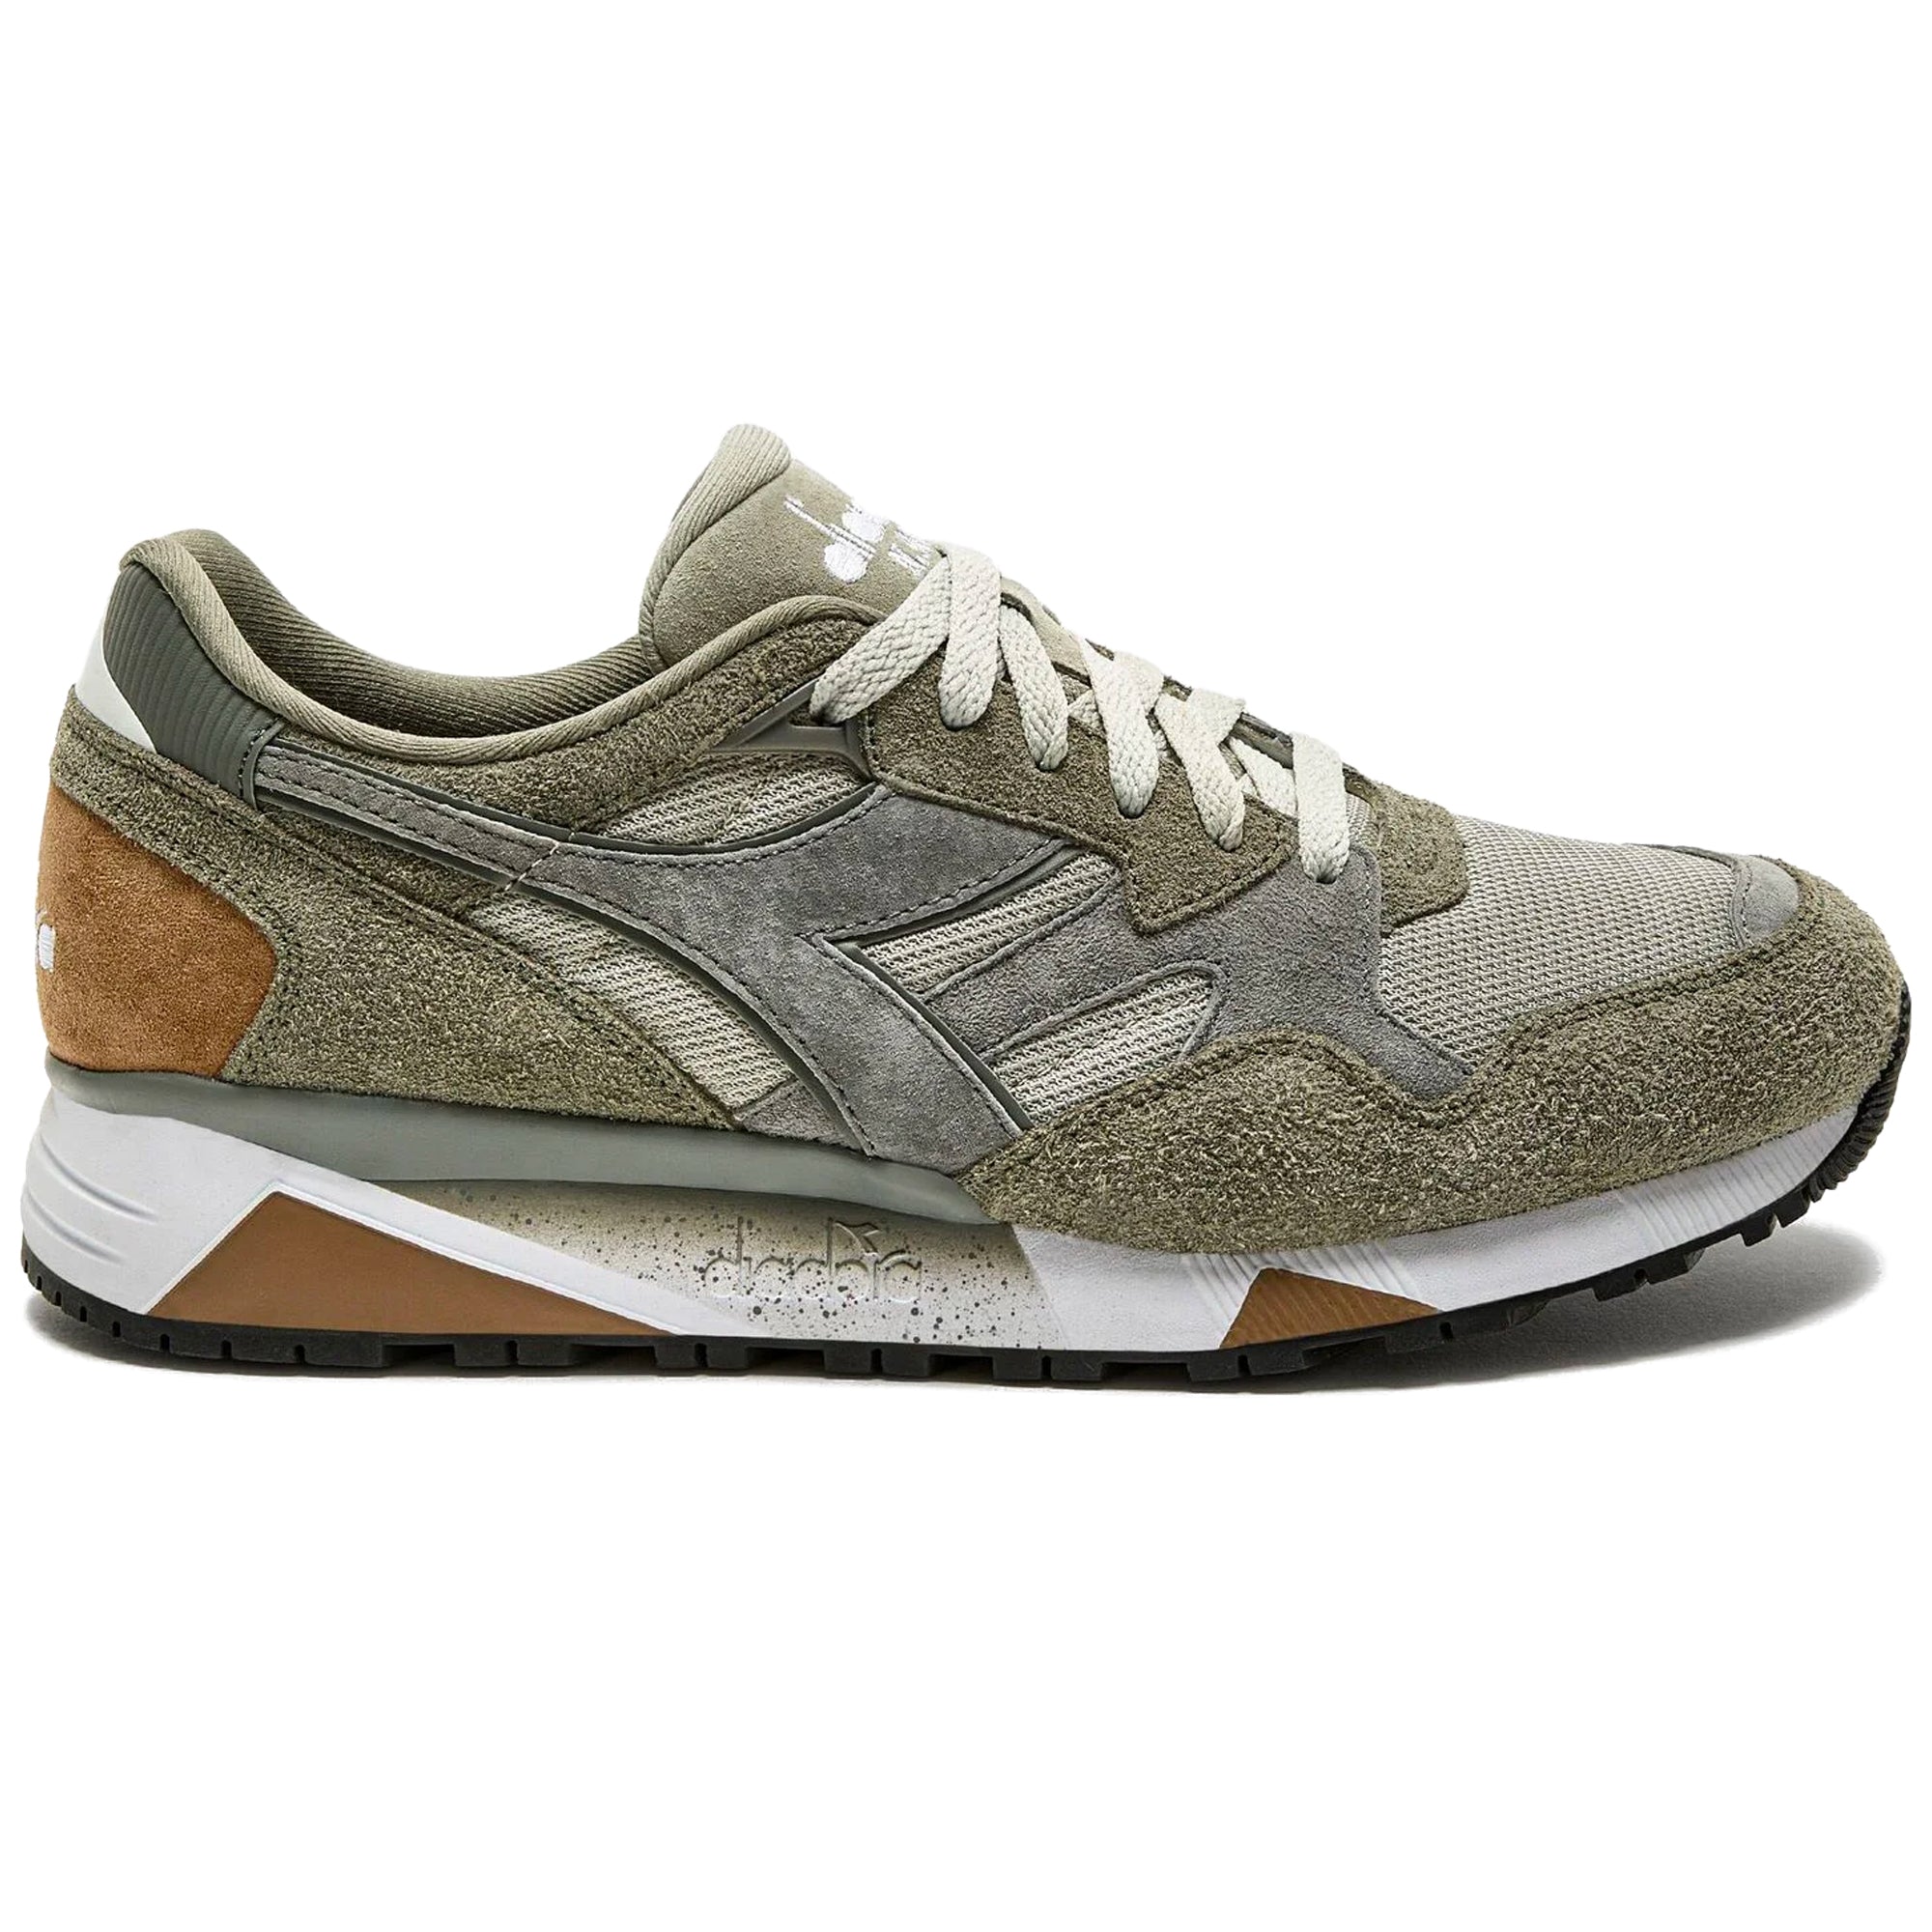 Diadora N9002 'Winter Pack' Trainers - Wild Dove / Grey Willow